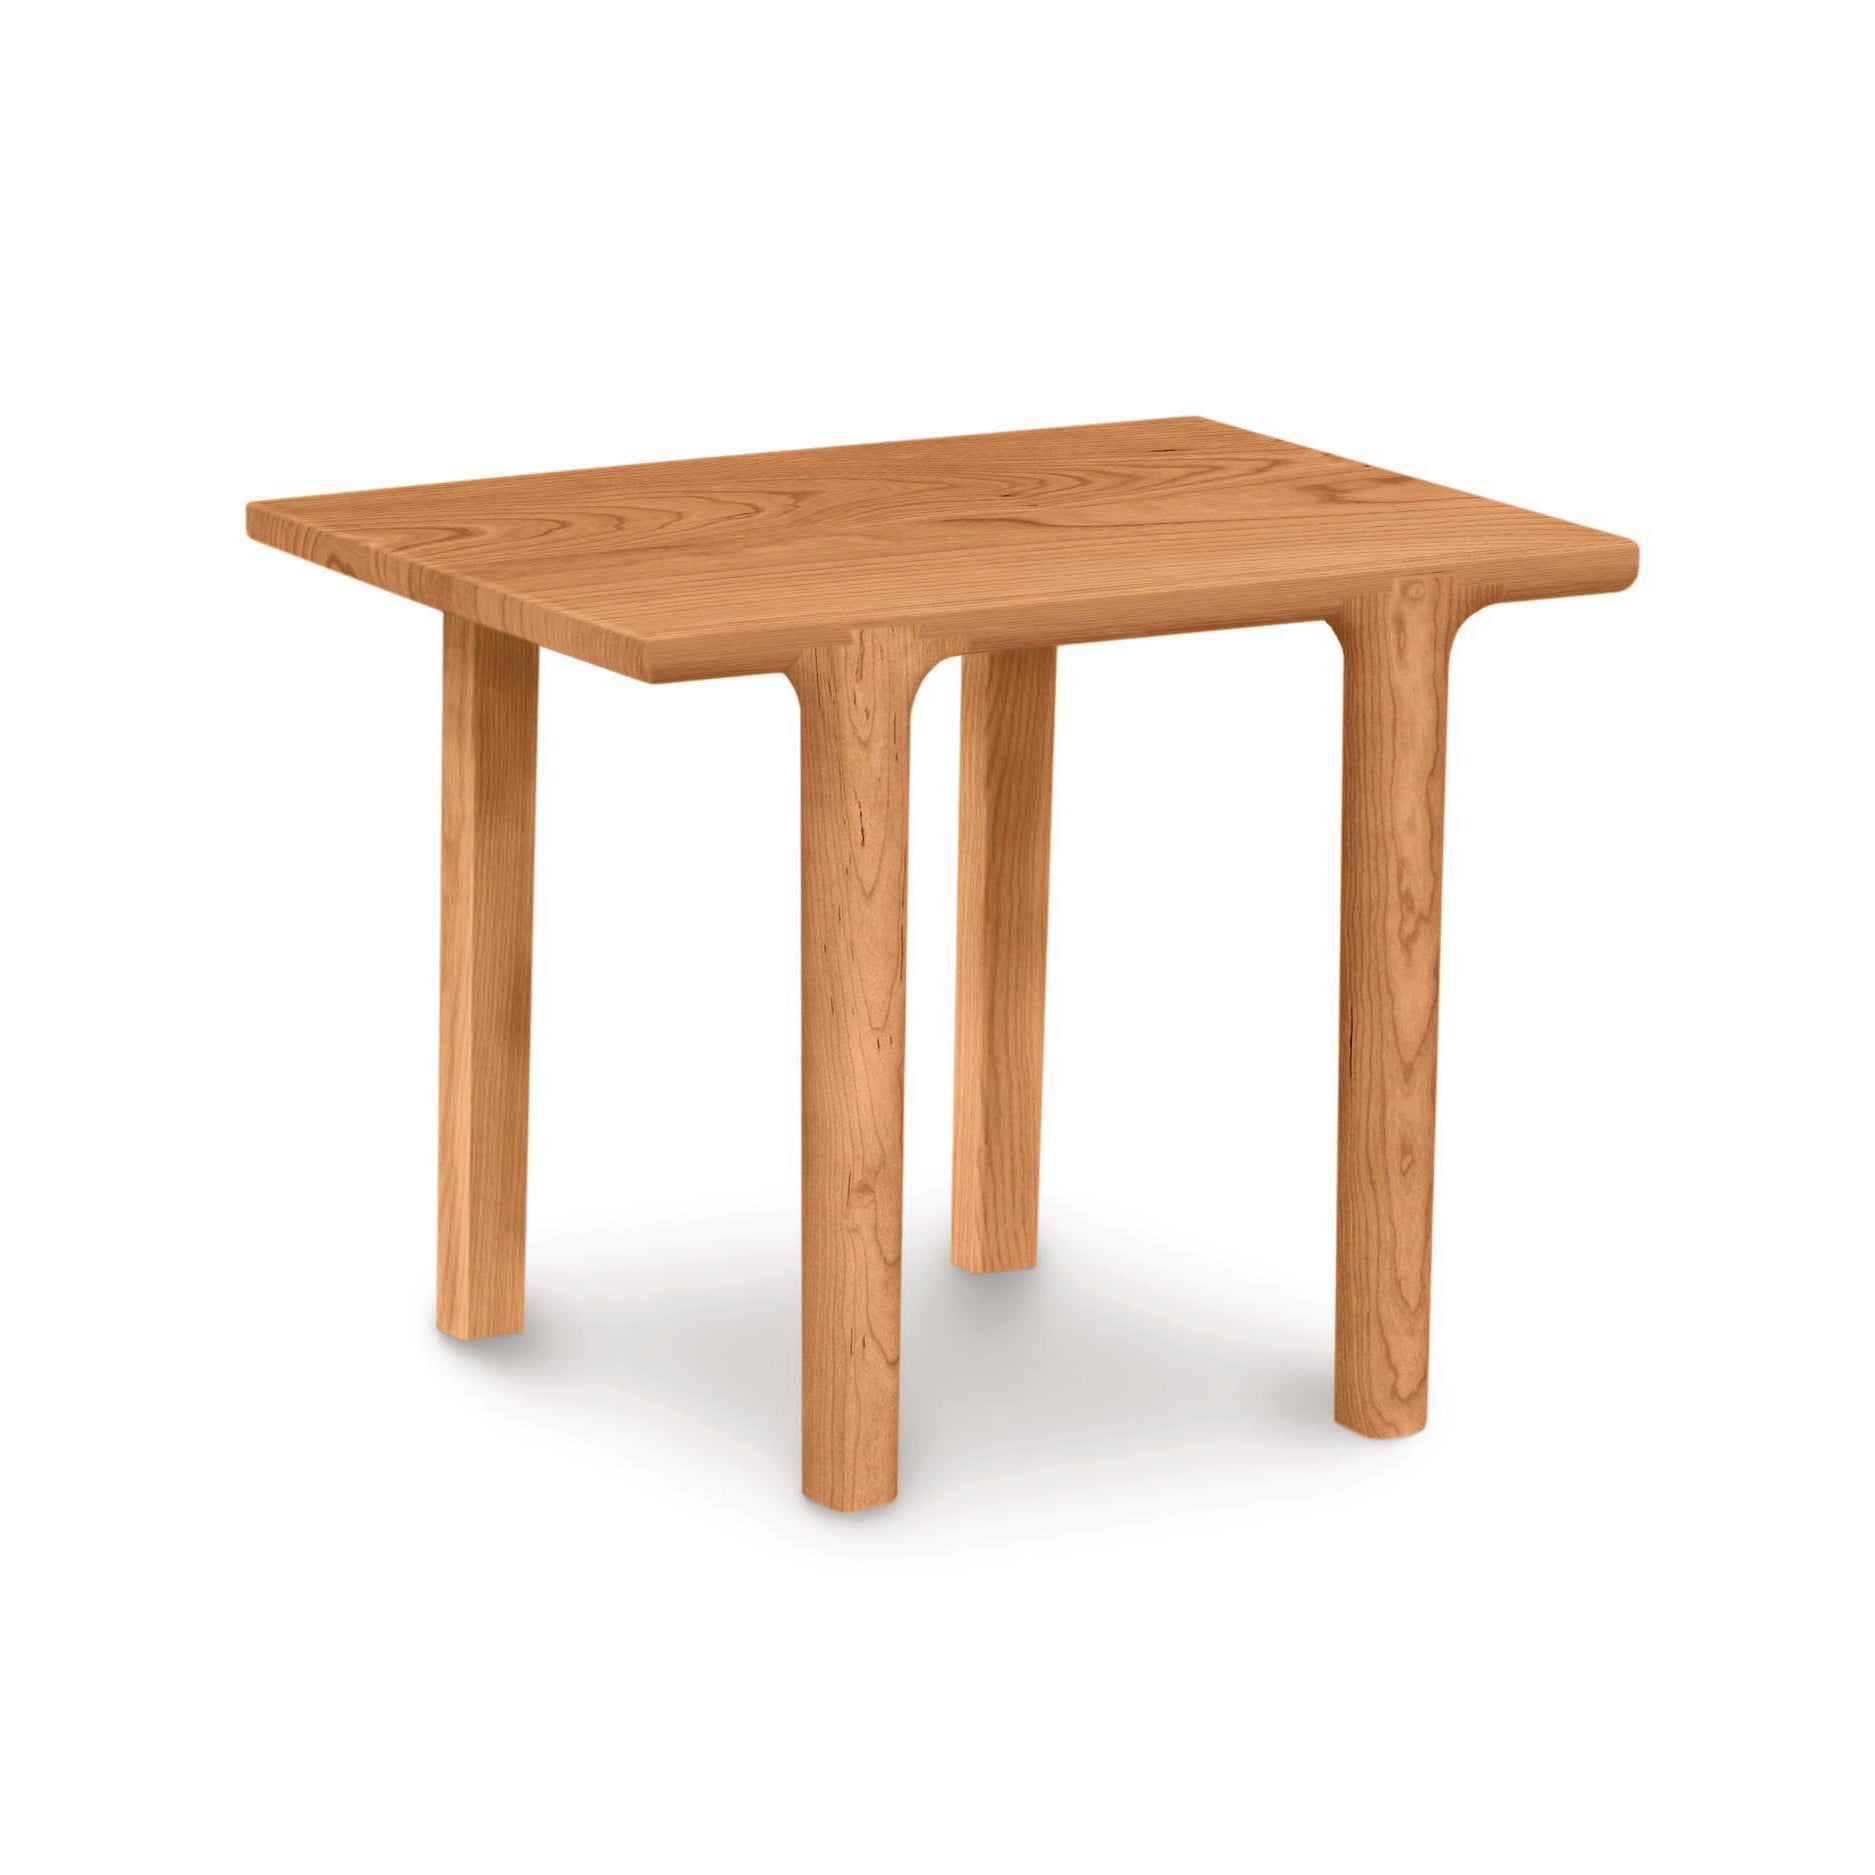 The Copeland Furniture Sierra Rectangular End Table, with its modern personality, is a small wooden table featuring two legs. It stands elegantly on a white background.